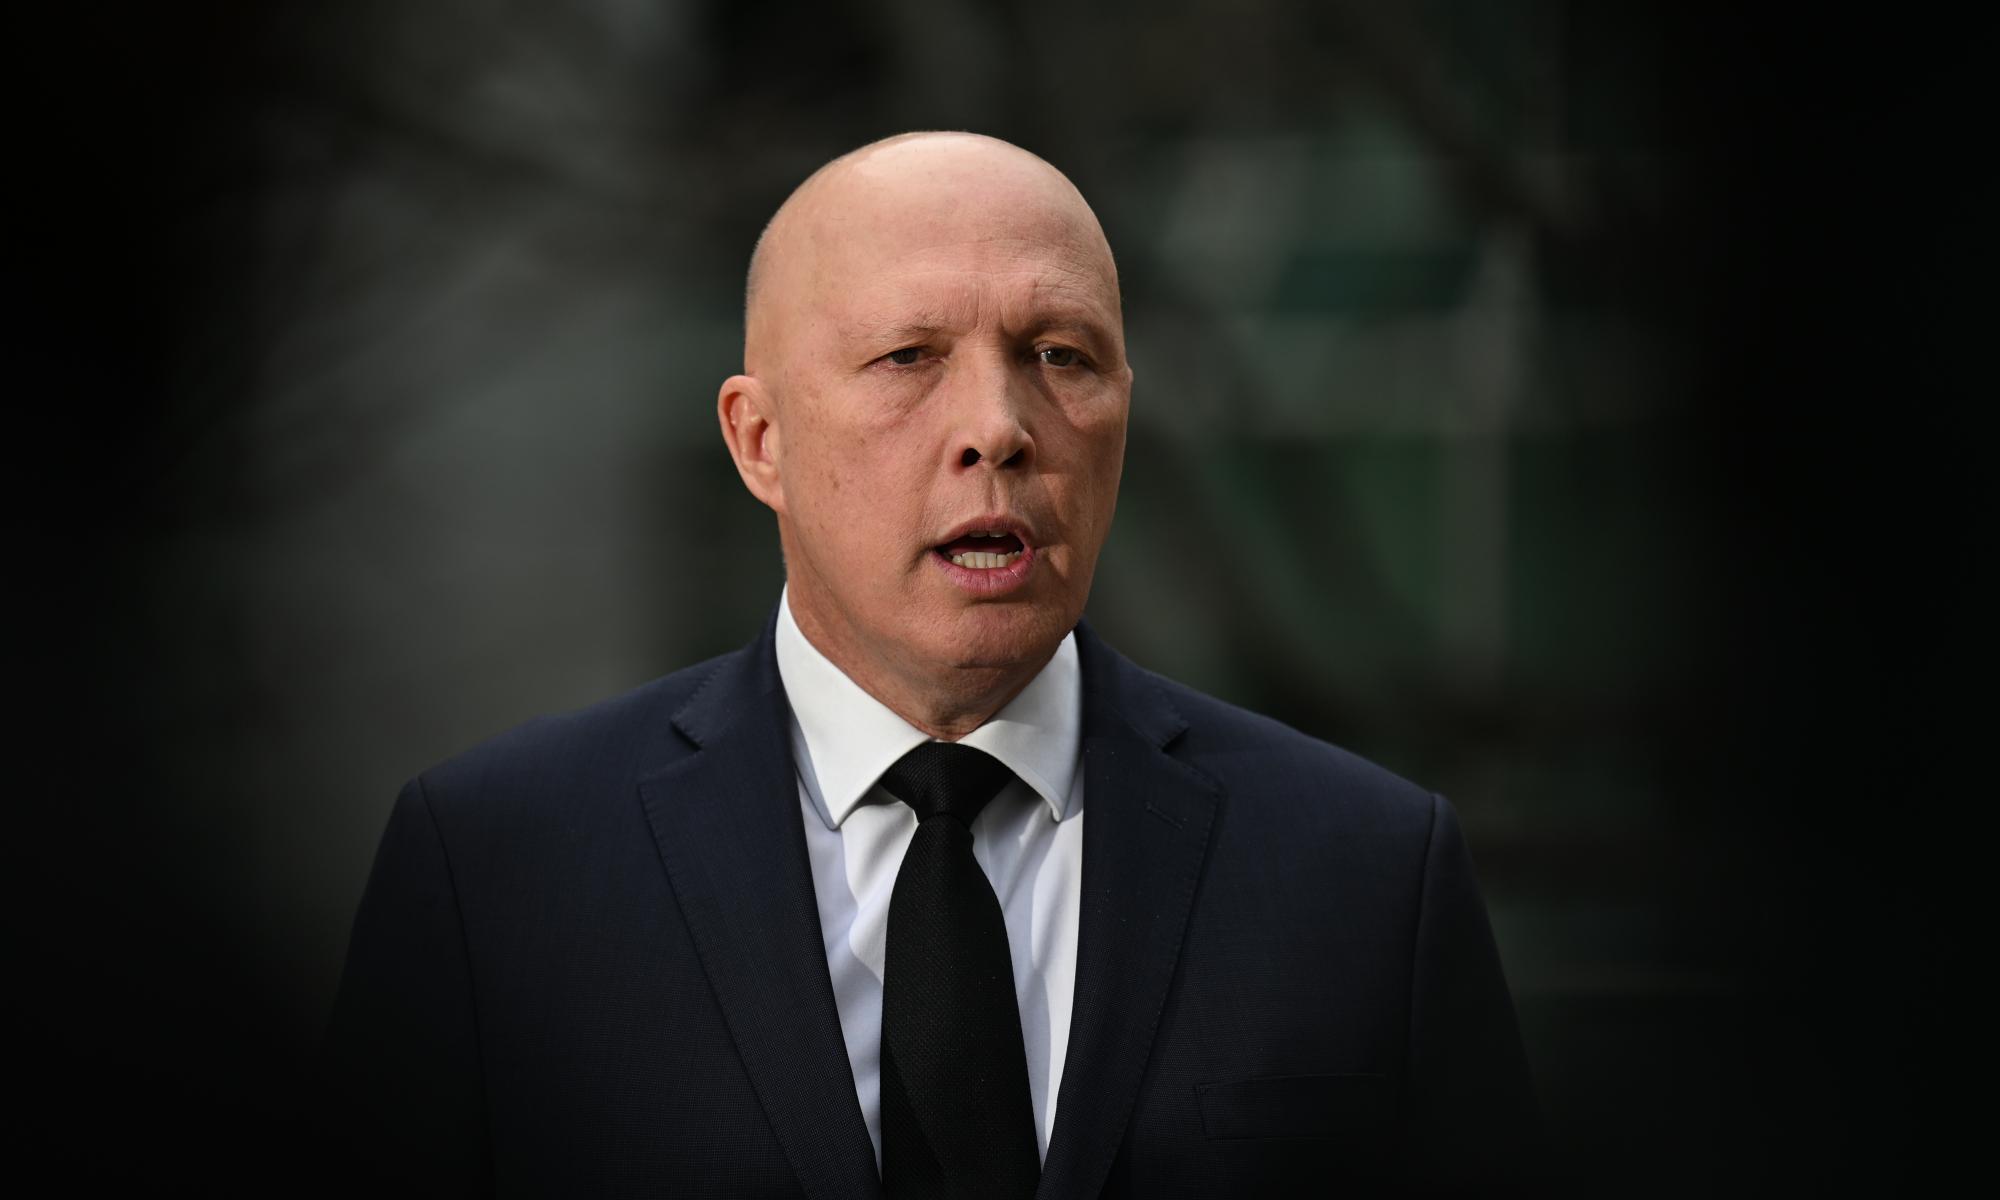 Peter Dutton says Labor’s renewable energy overhaul plan ‘never going to be realised’